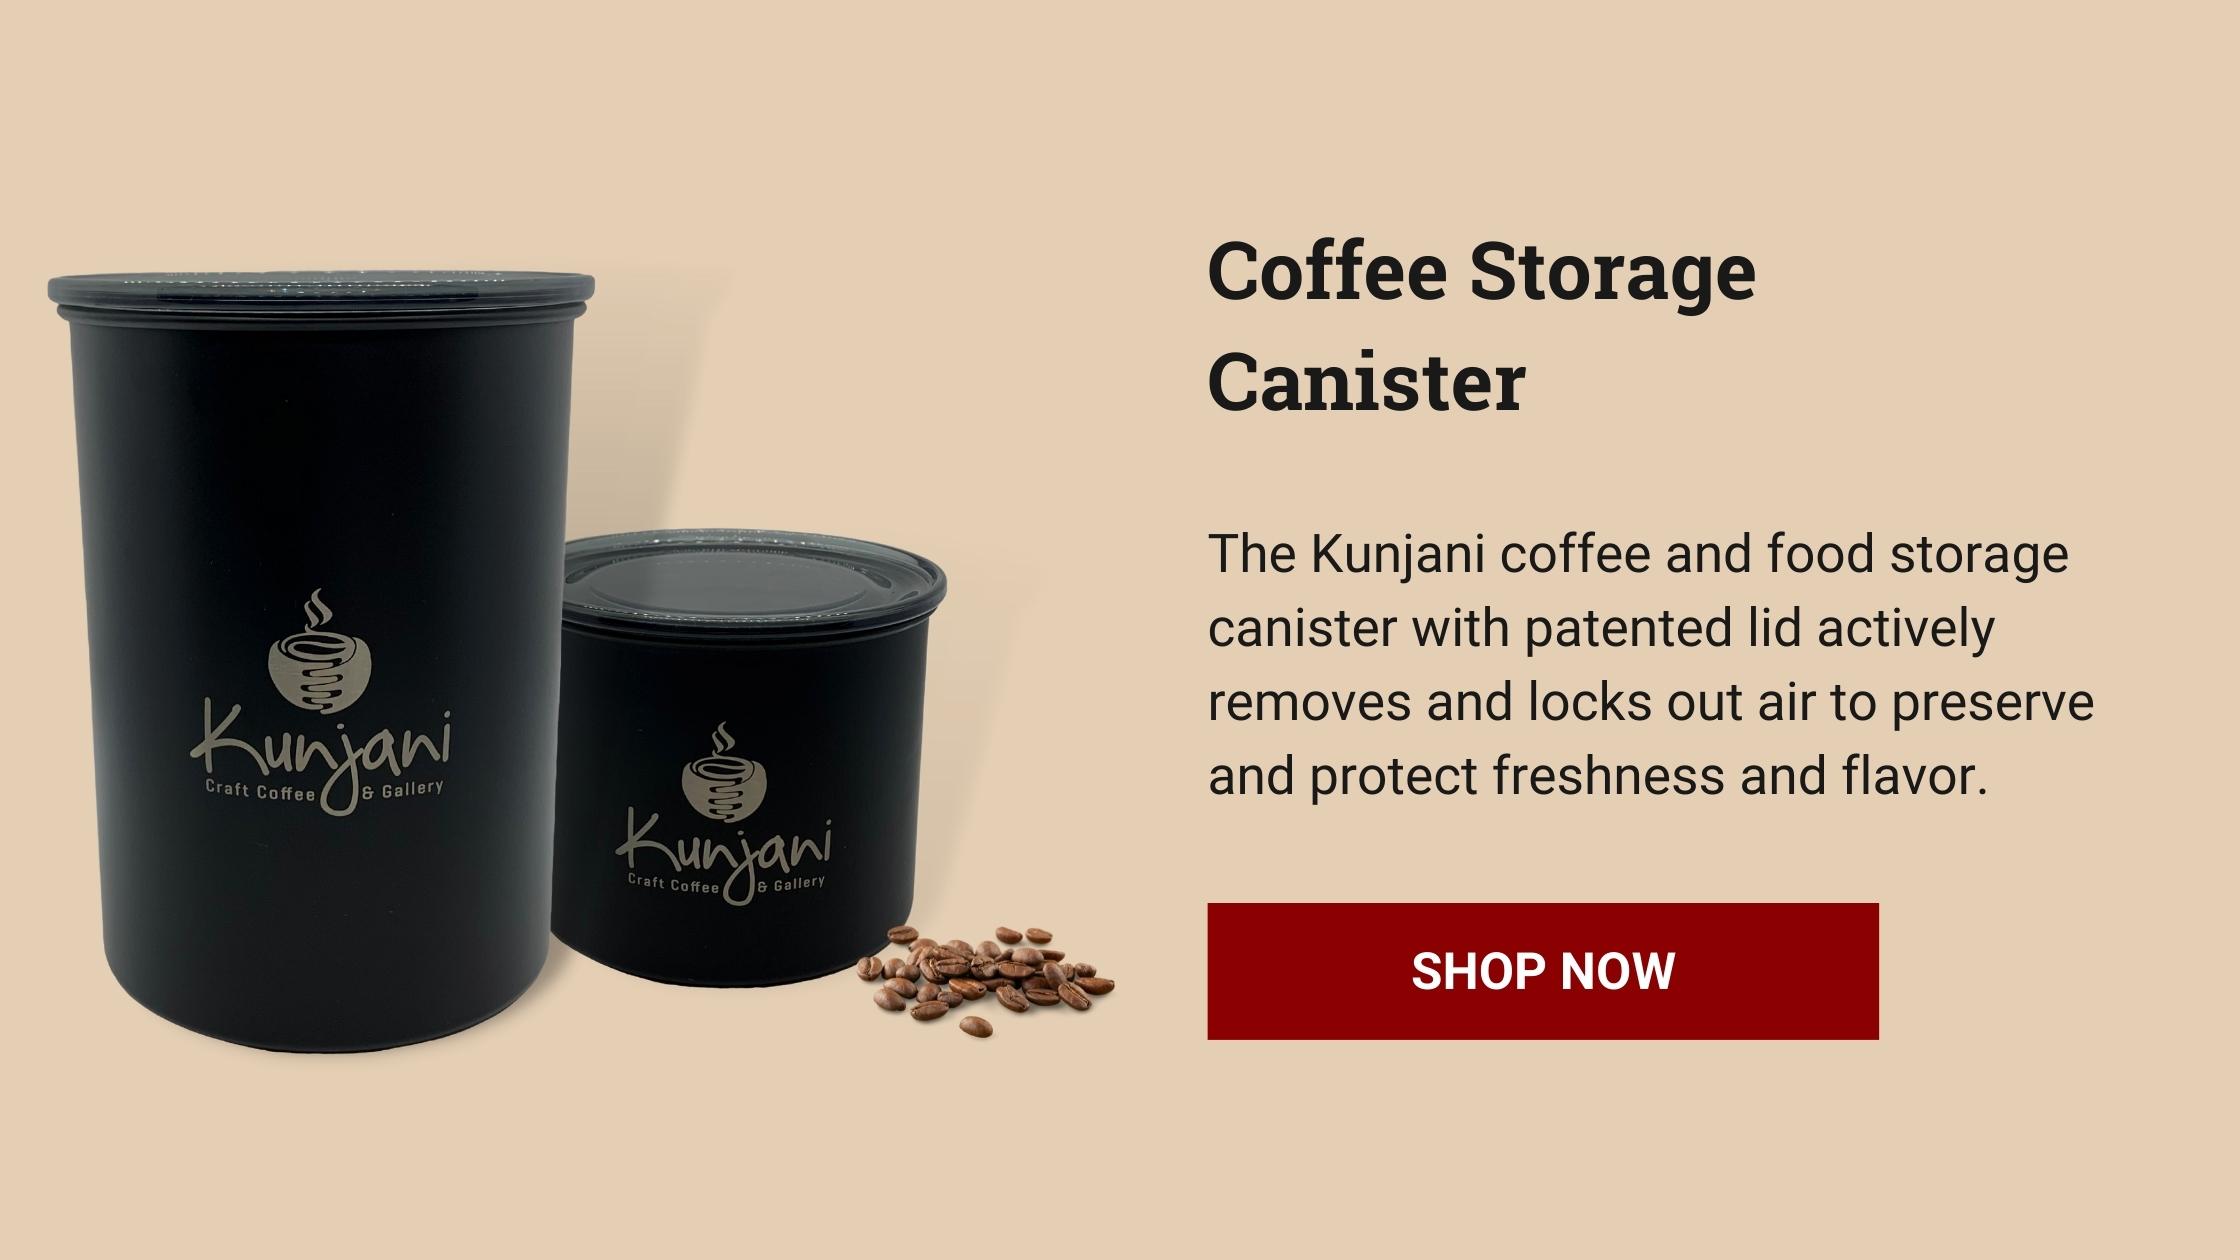 Shop our coffee storage canister